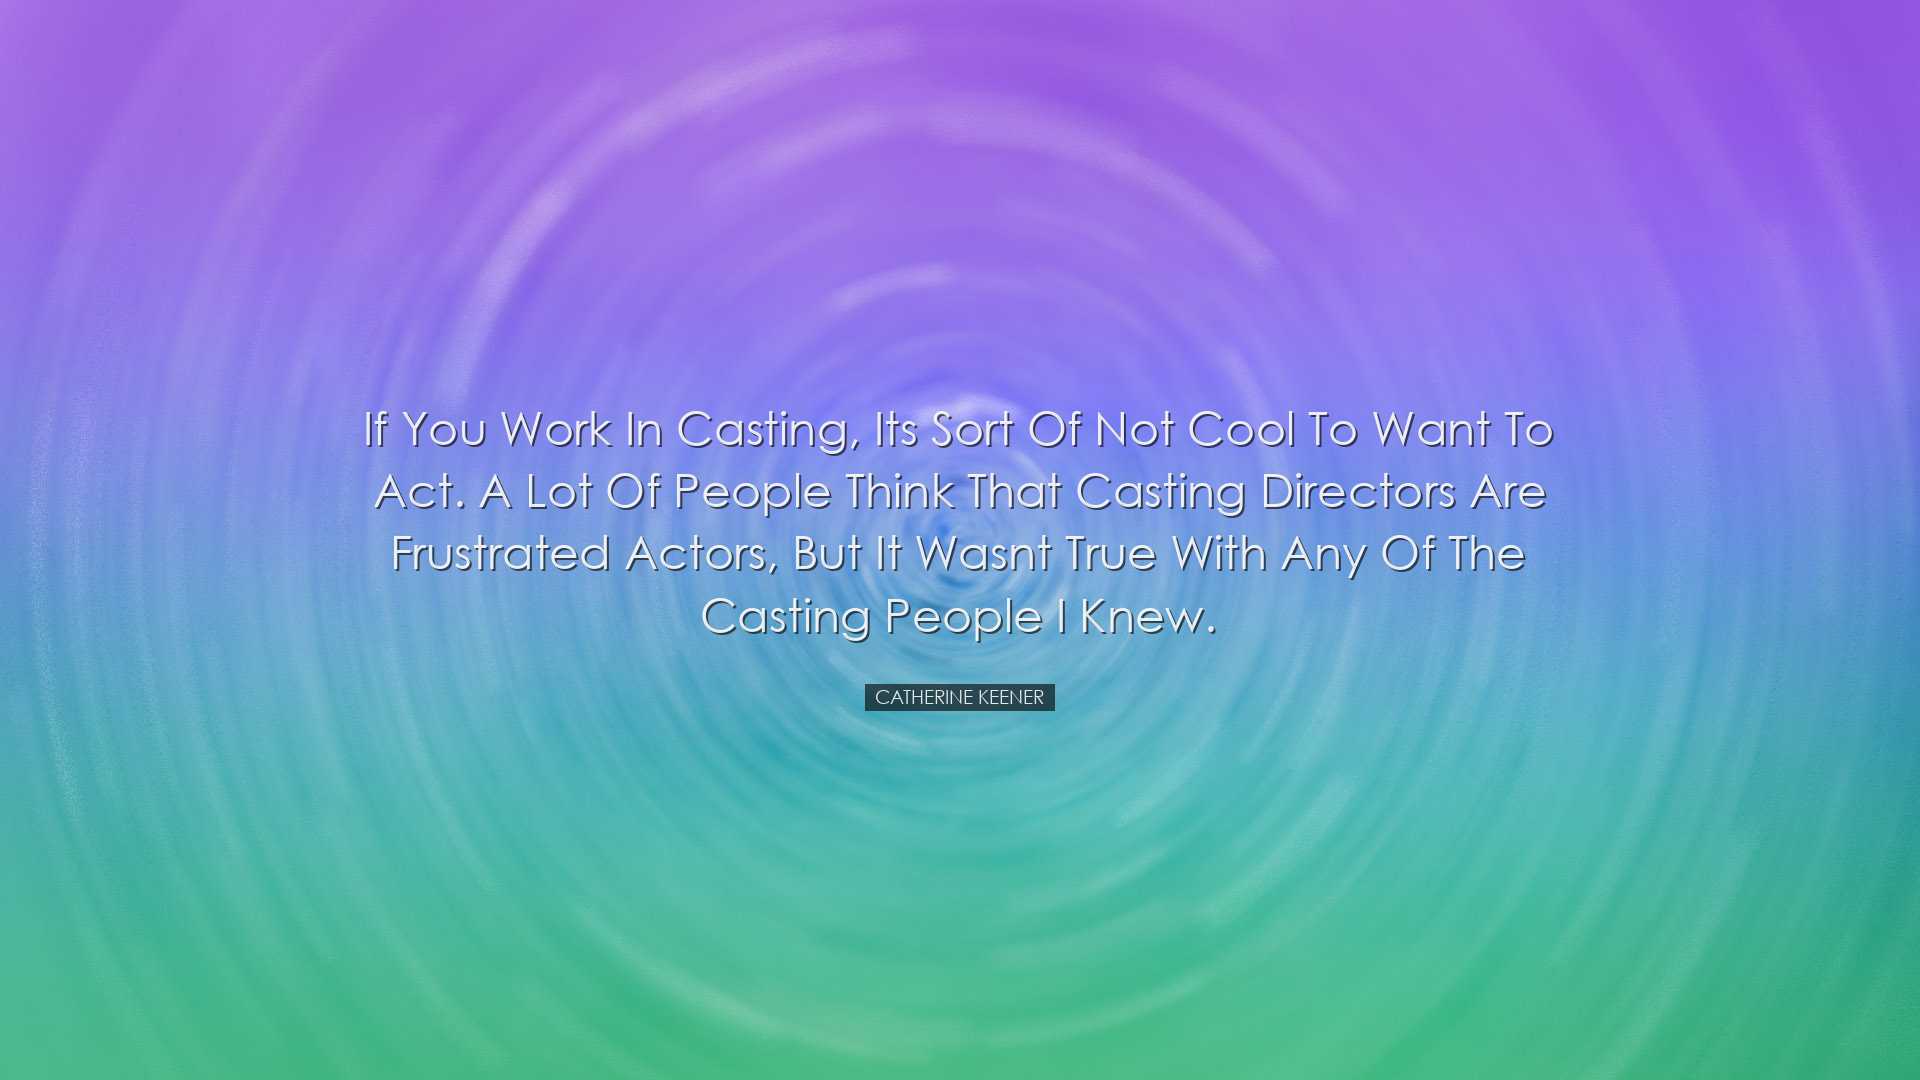 If you work in casting, its sort of not cool to want to act. A lot